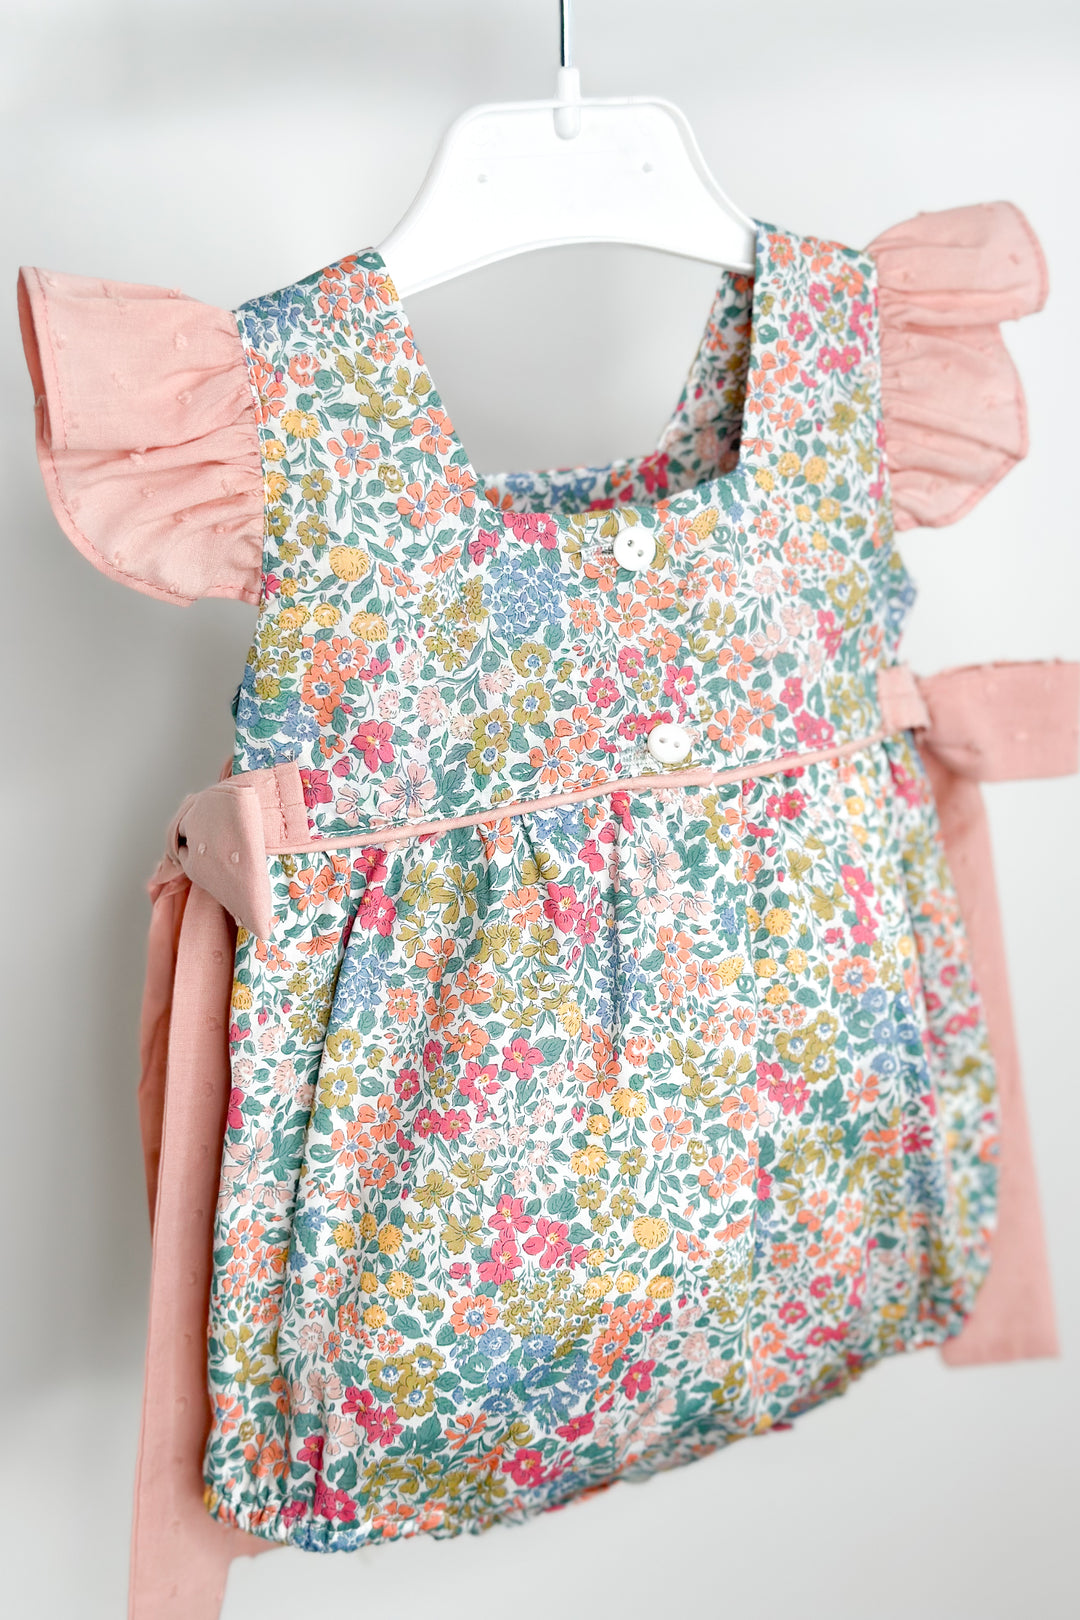 Puro Mimo "Joanna" Green & Pale Rose Floral Romper | Millie and John